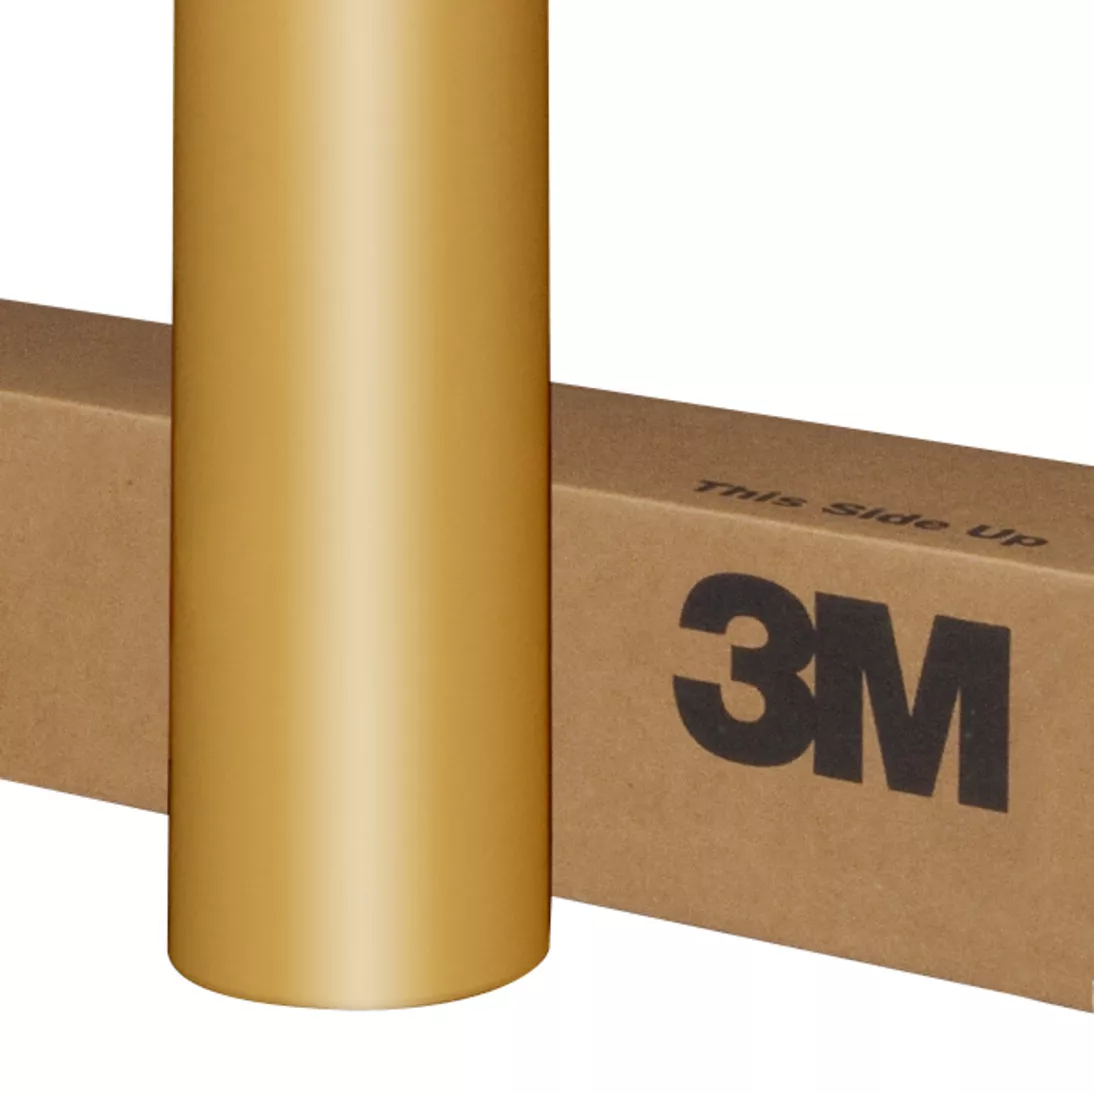 3M™ Scotchlite™ Reflective Graphic Film 680-64, Gold, 48 in x 50 yd, 1
Roll/Case